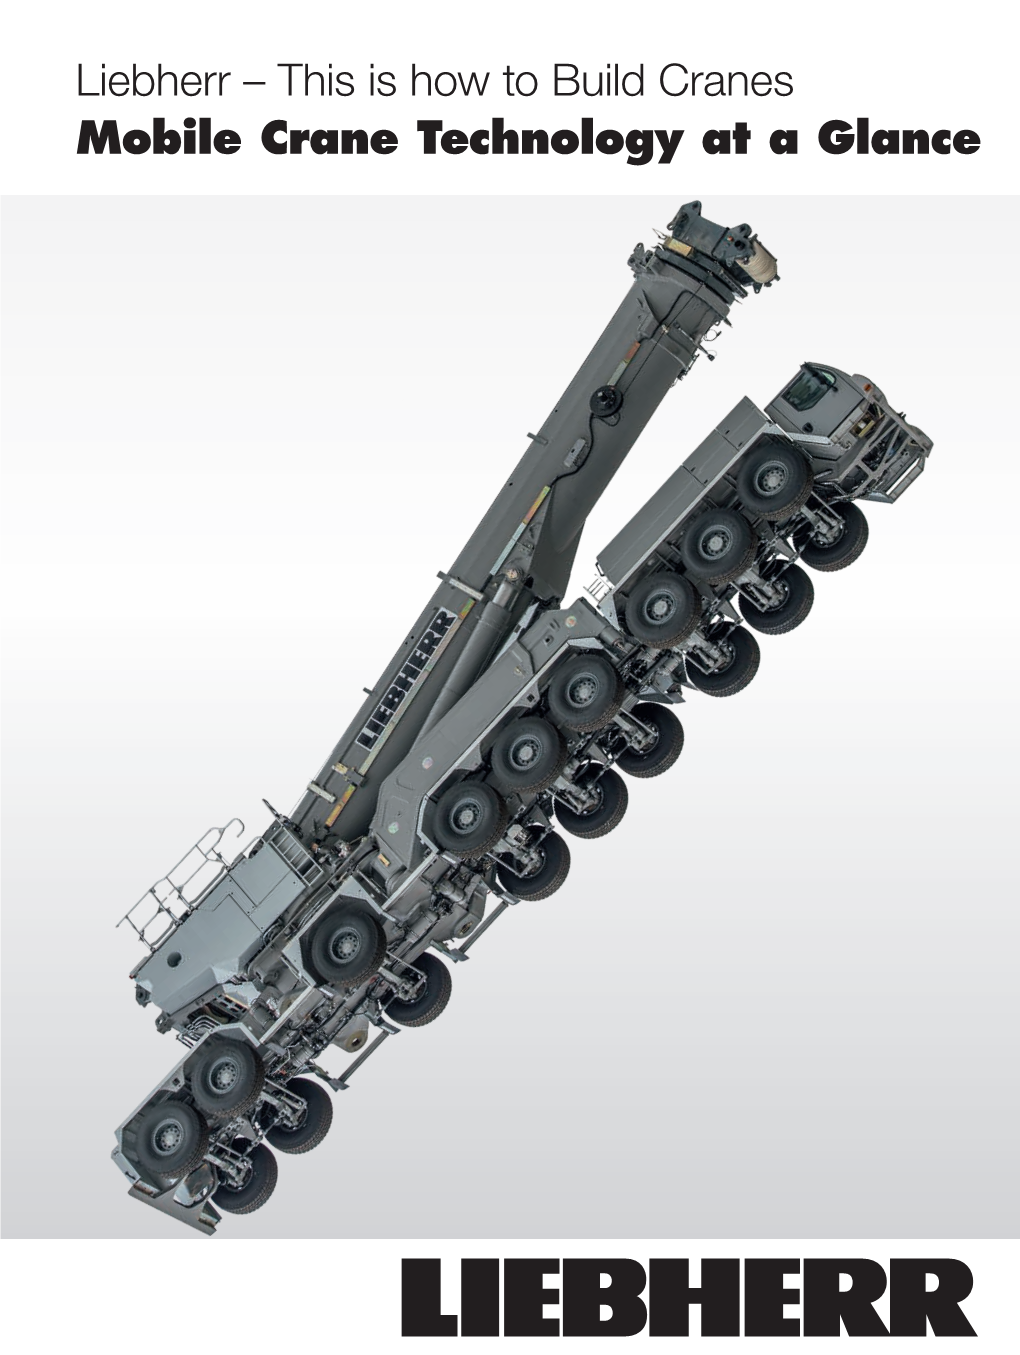 Mobile Crane Technology at a Glance